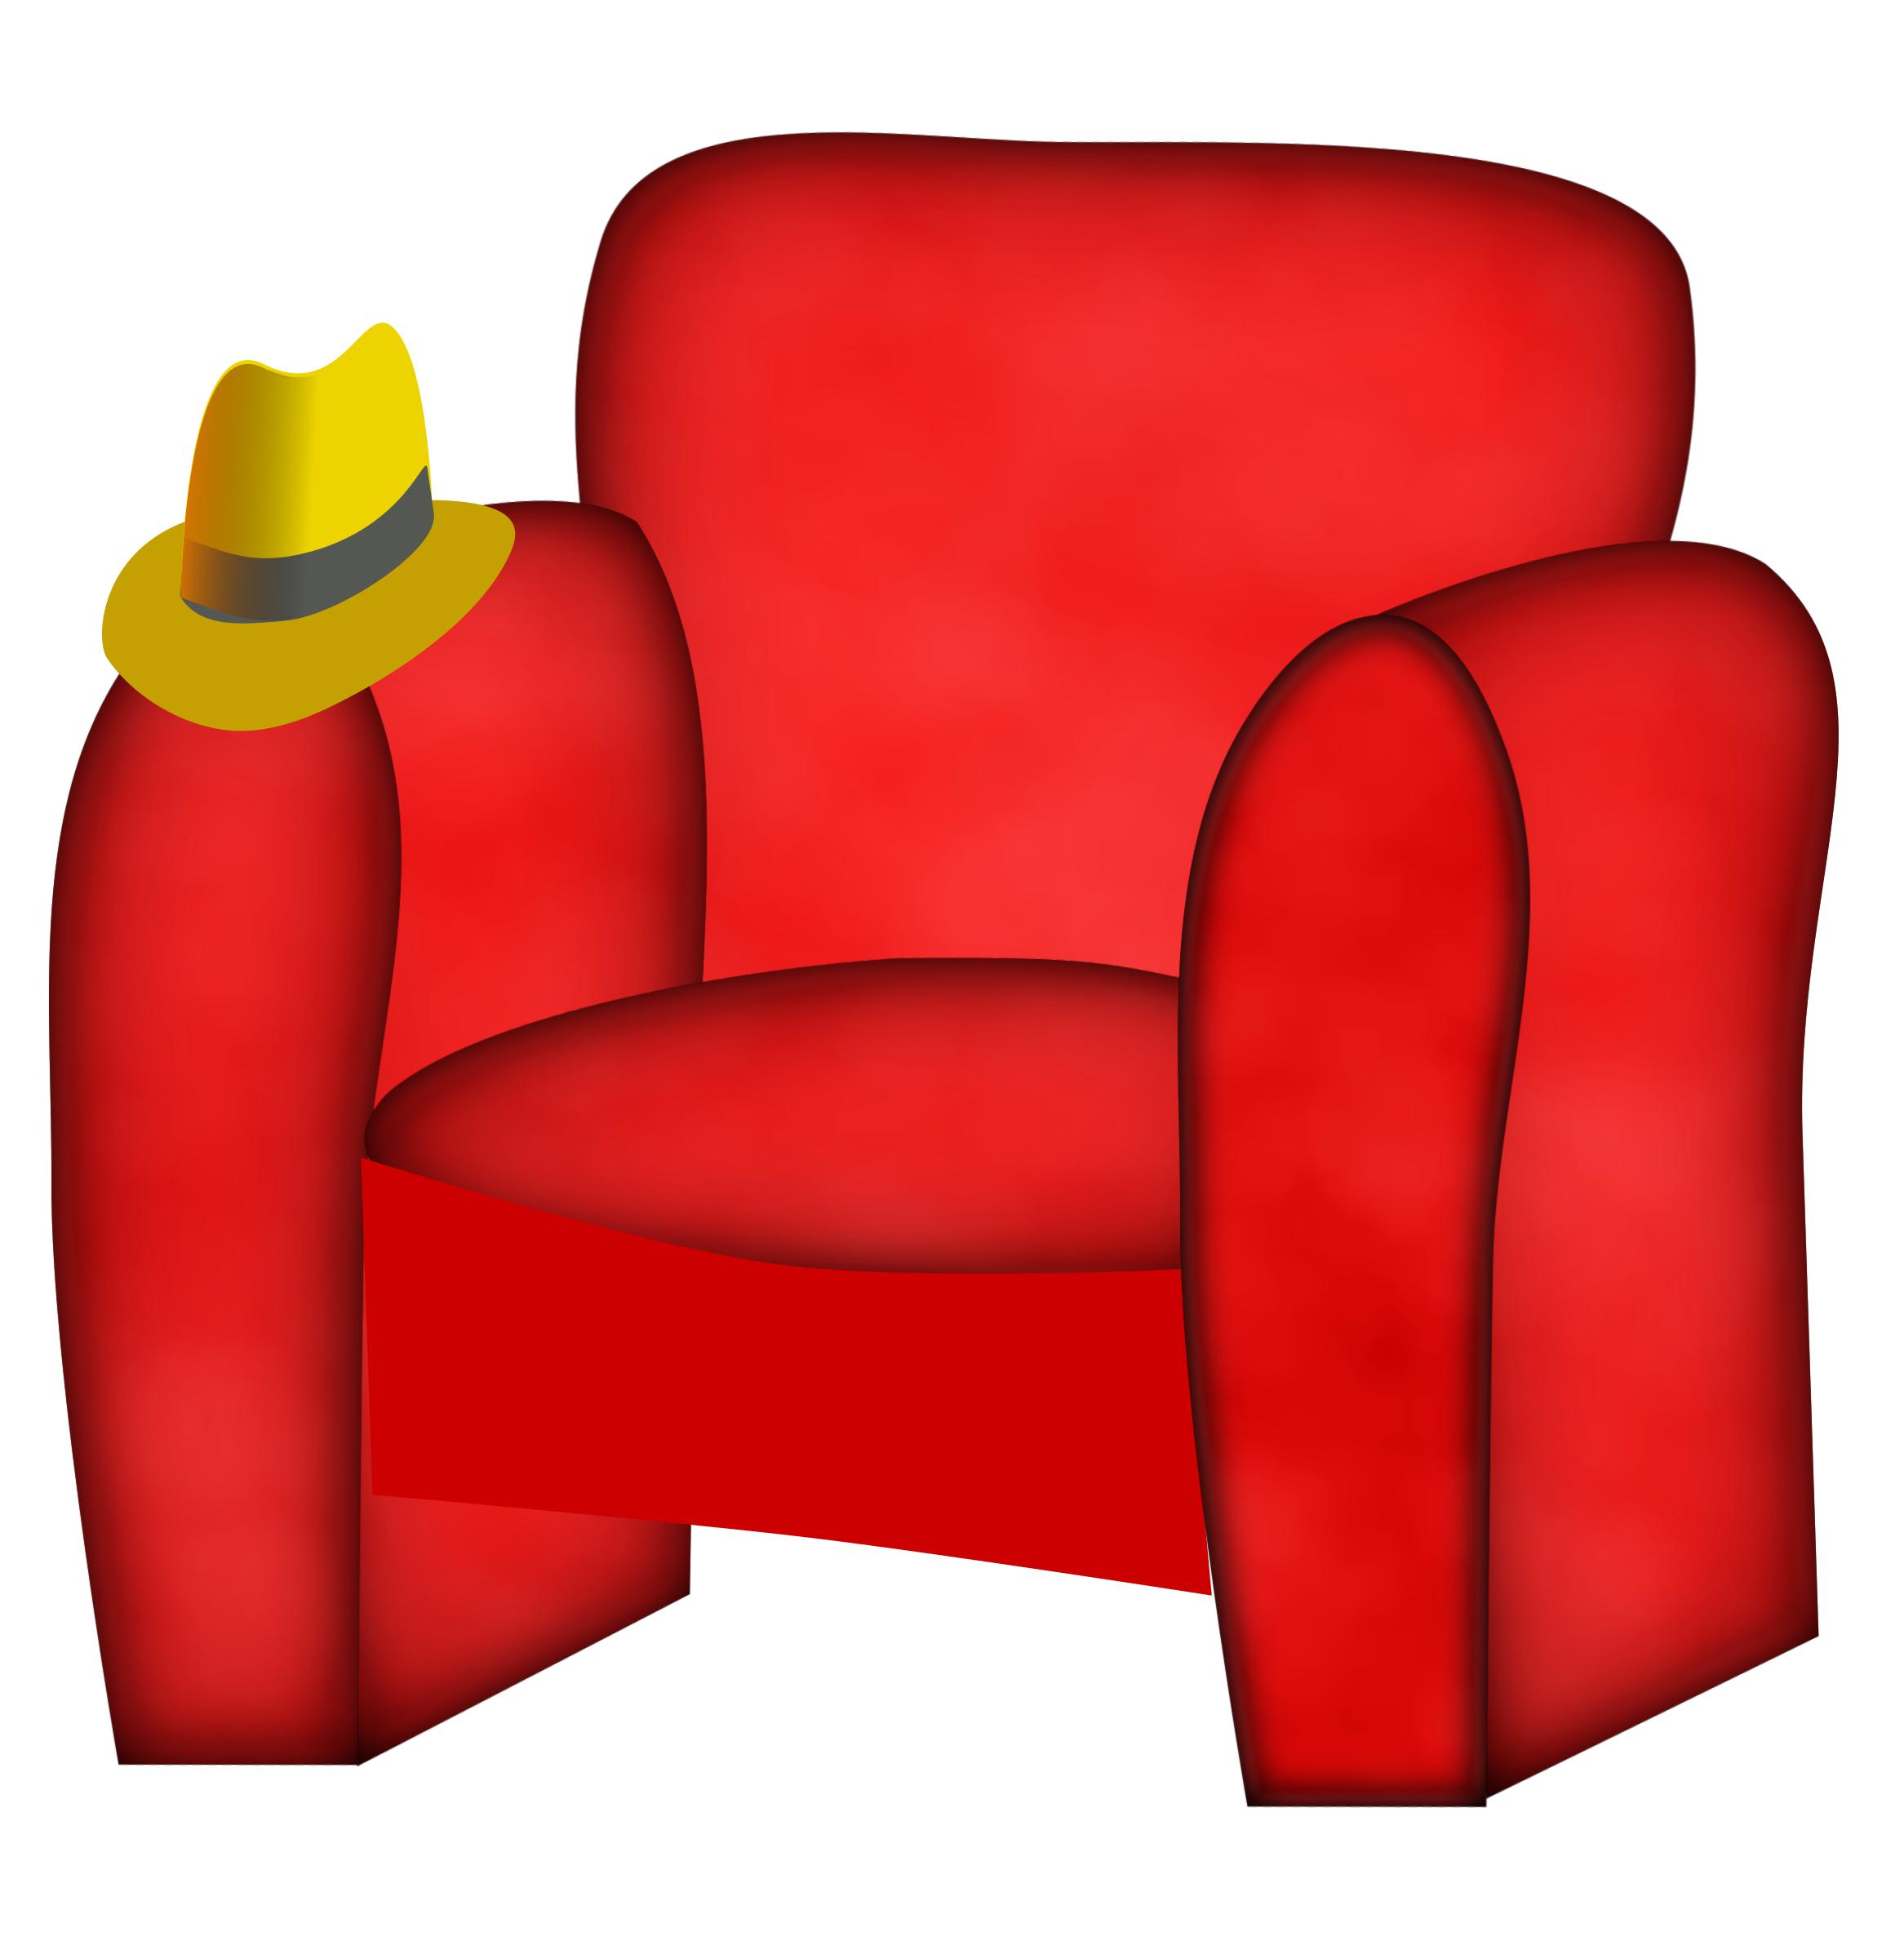 hat on a chair . png